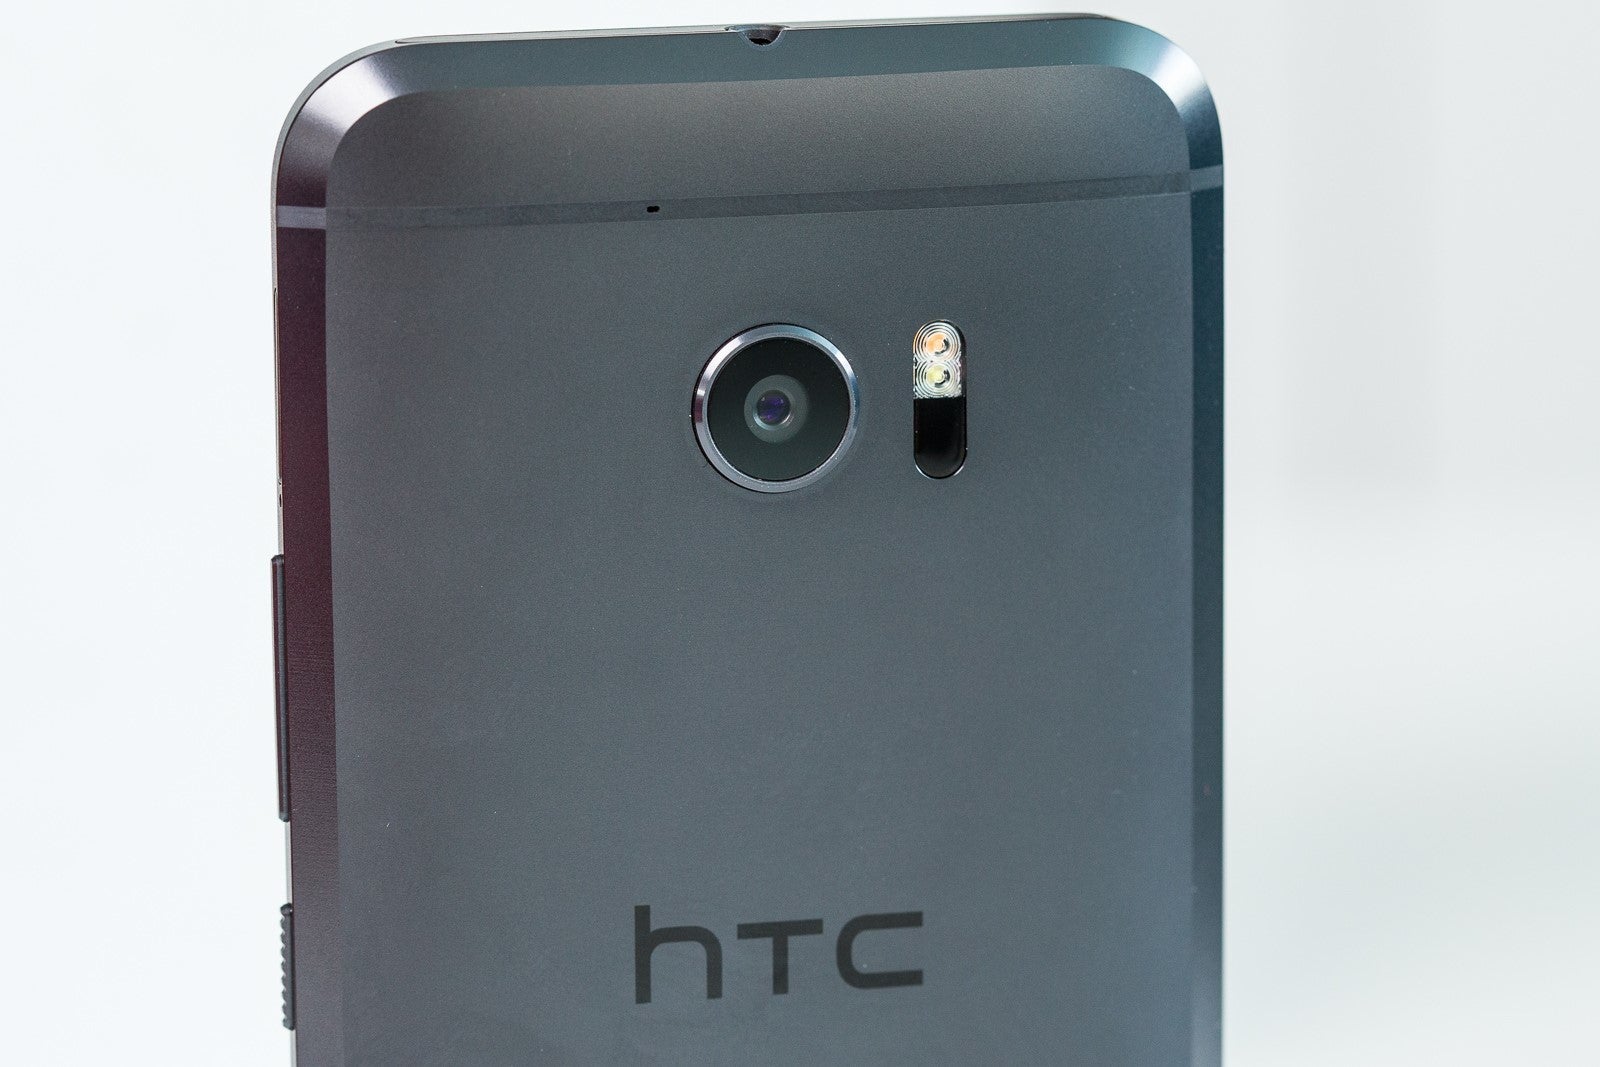 The HTC 10 - HTC is working on four Wildfire-branded phones, leaked images reveal